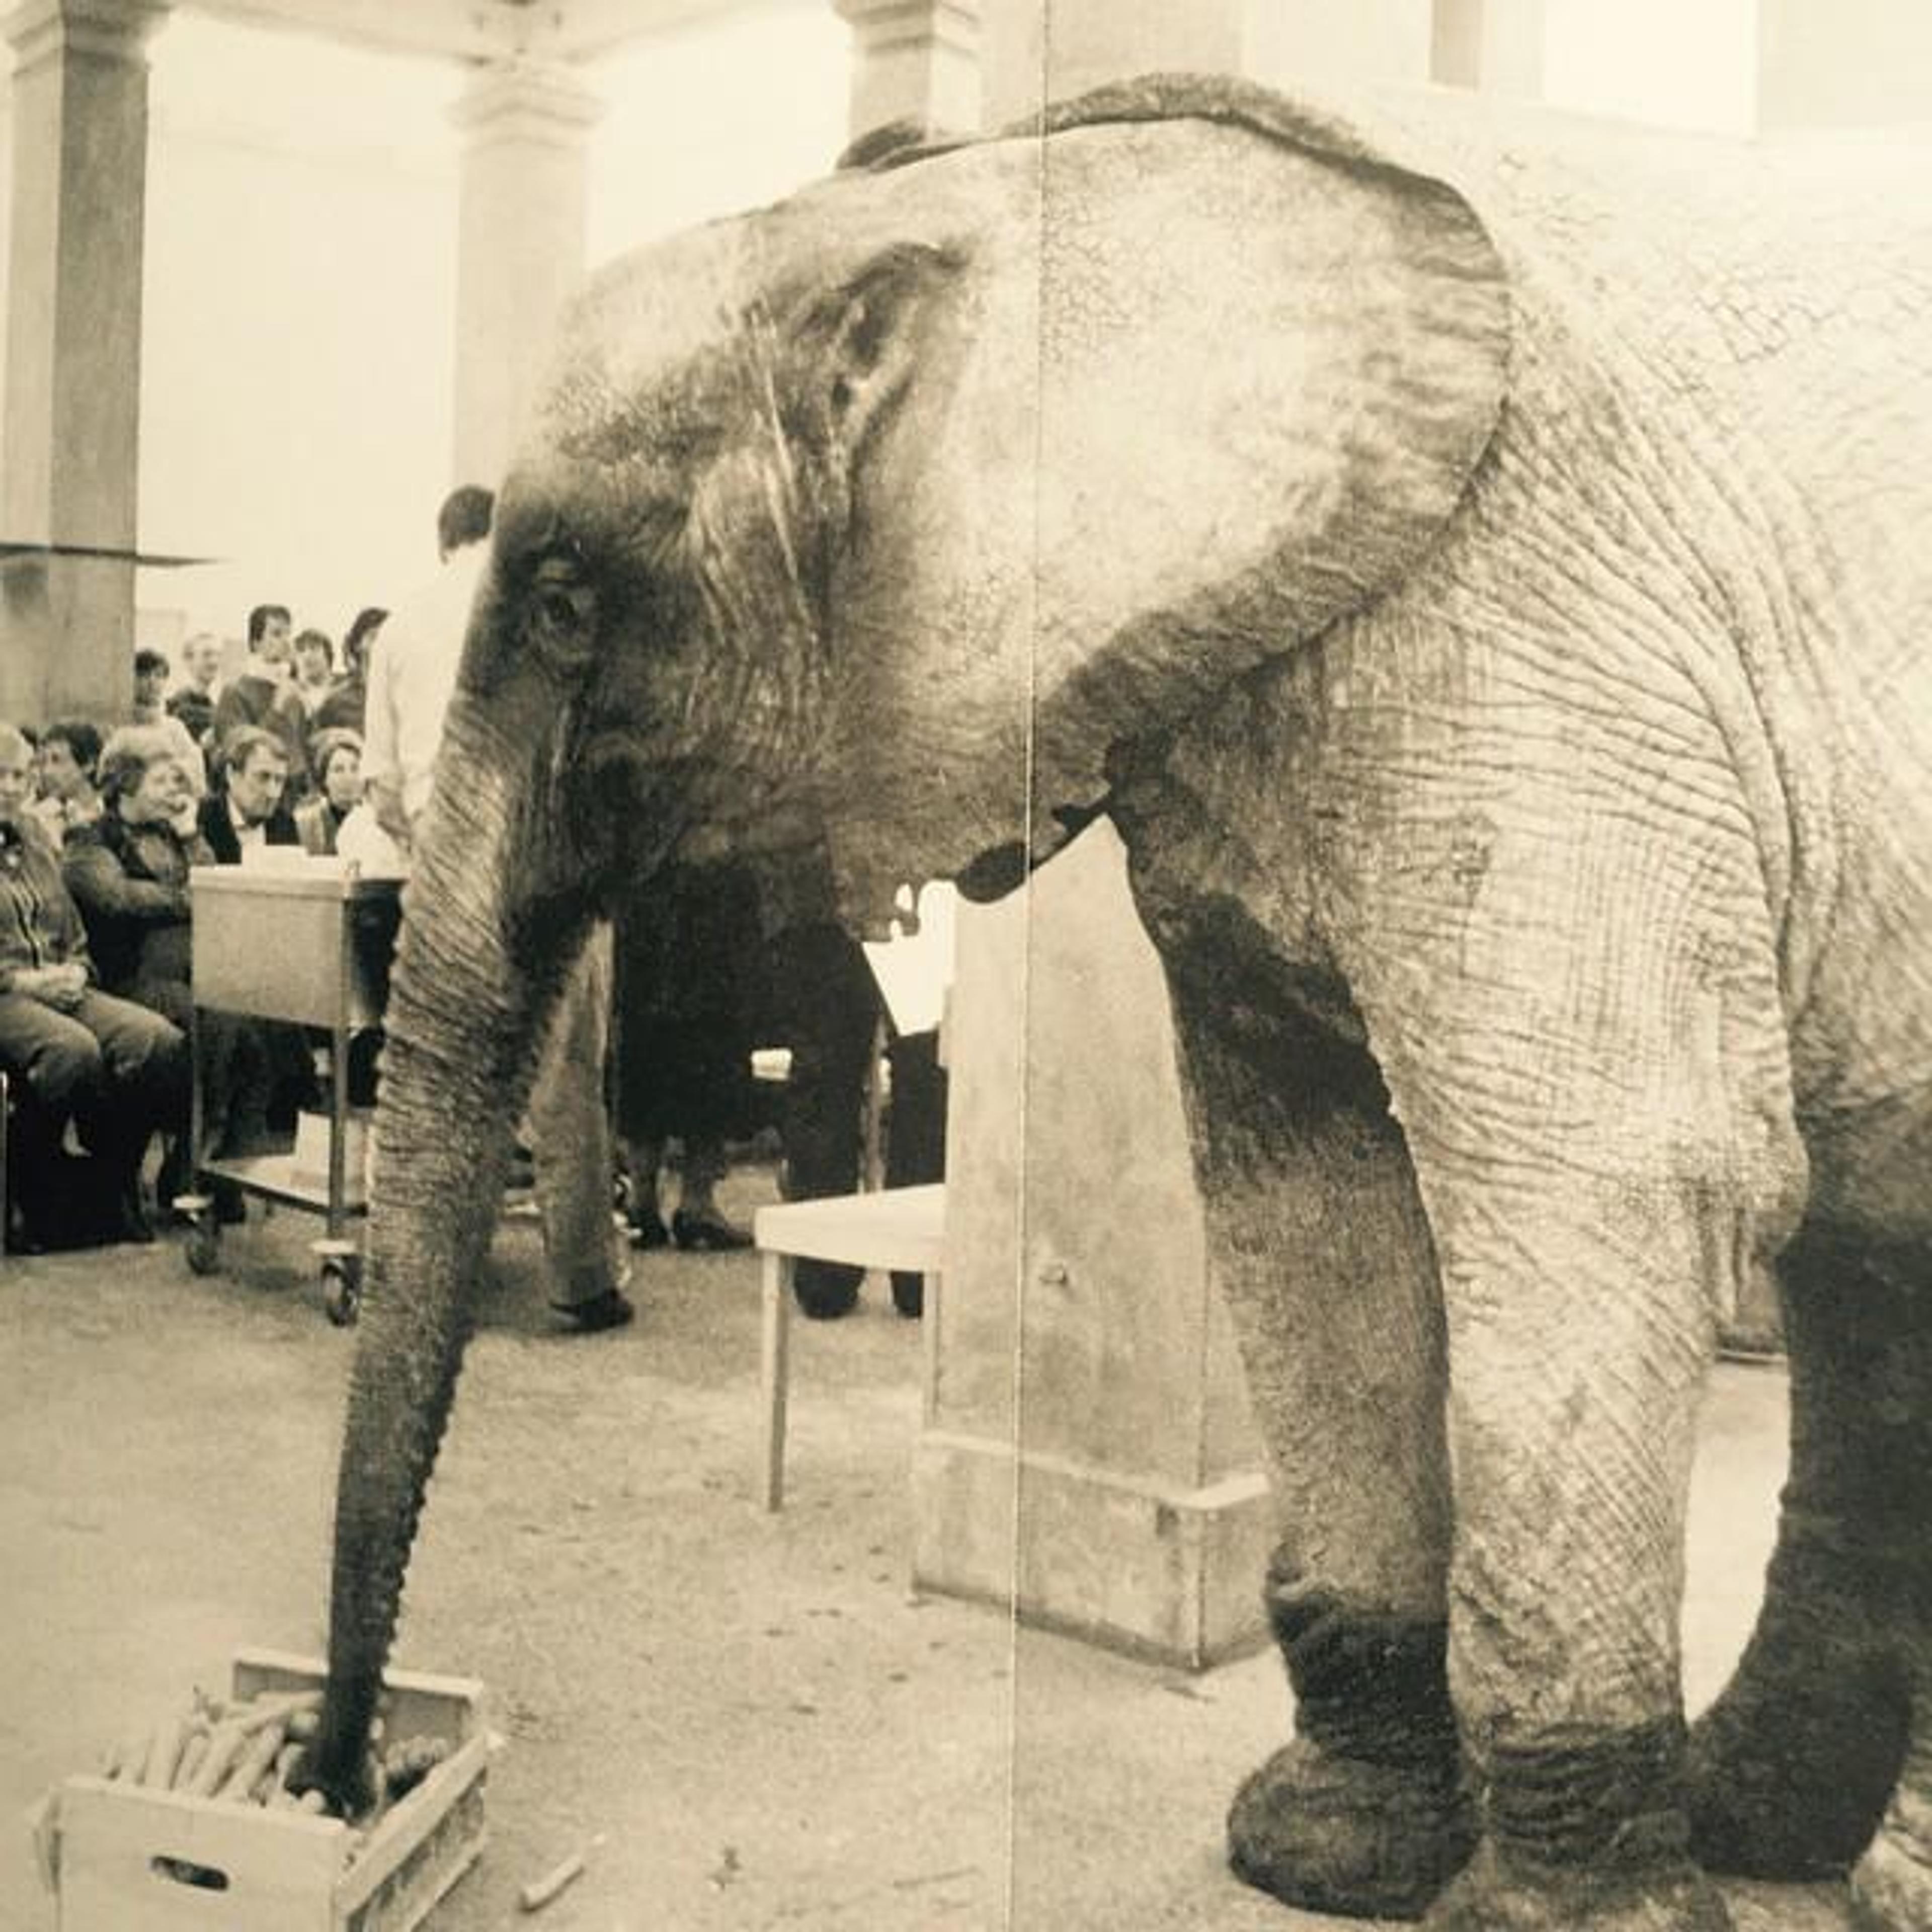 &ldquo;We are of one kind&rdquo;, Concert at the Städelschule, Frankfurt, 1981 The public, people, and animals were listening to the same music and in the interval received the same snack: carrots, steamed in butter for the people, fresh for the elephant and his friends.